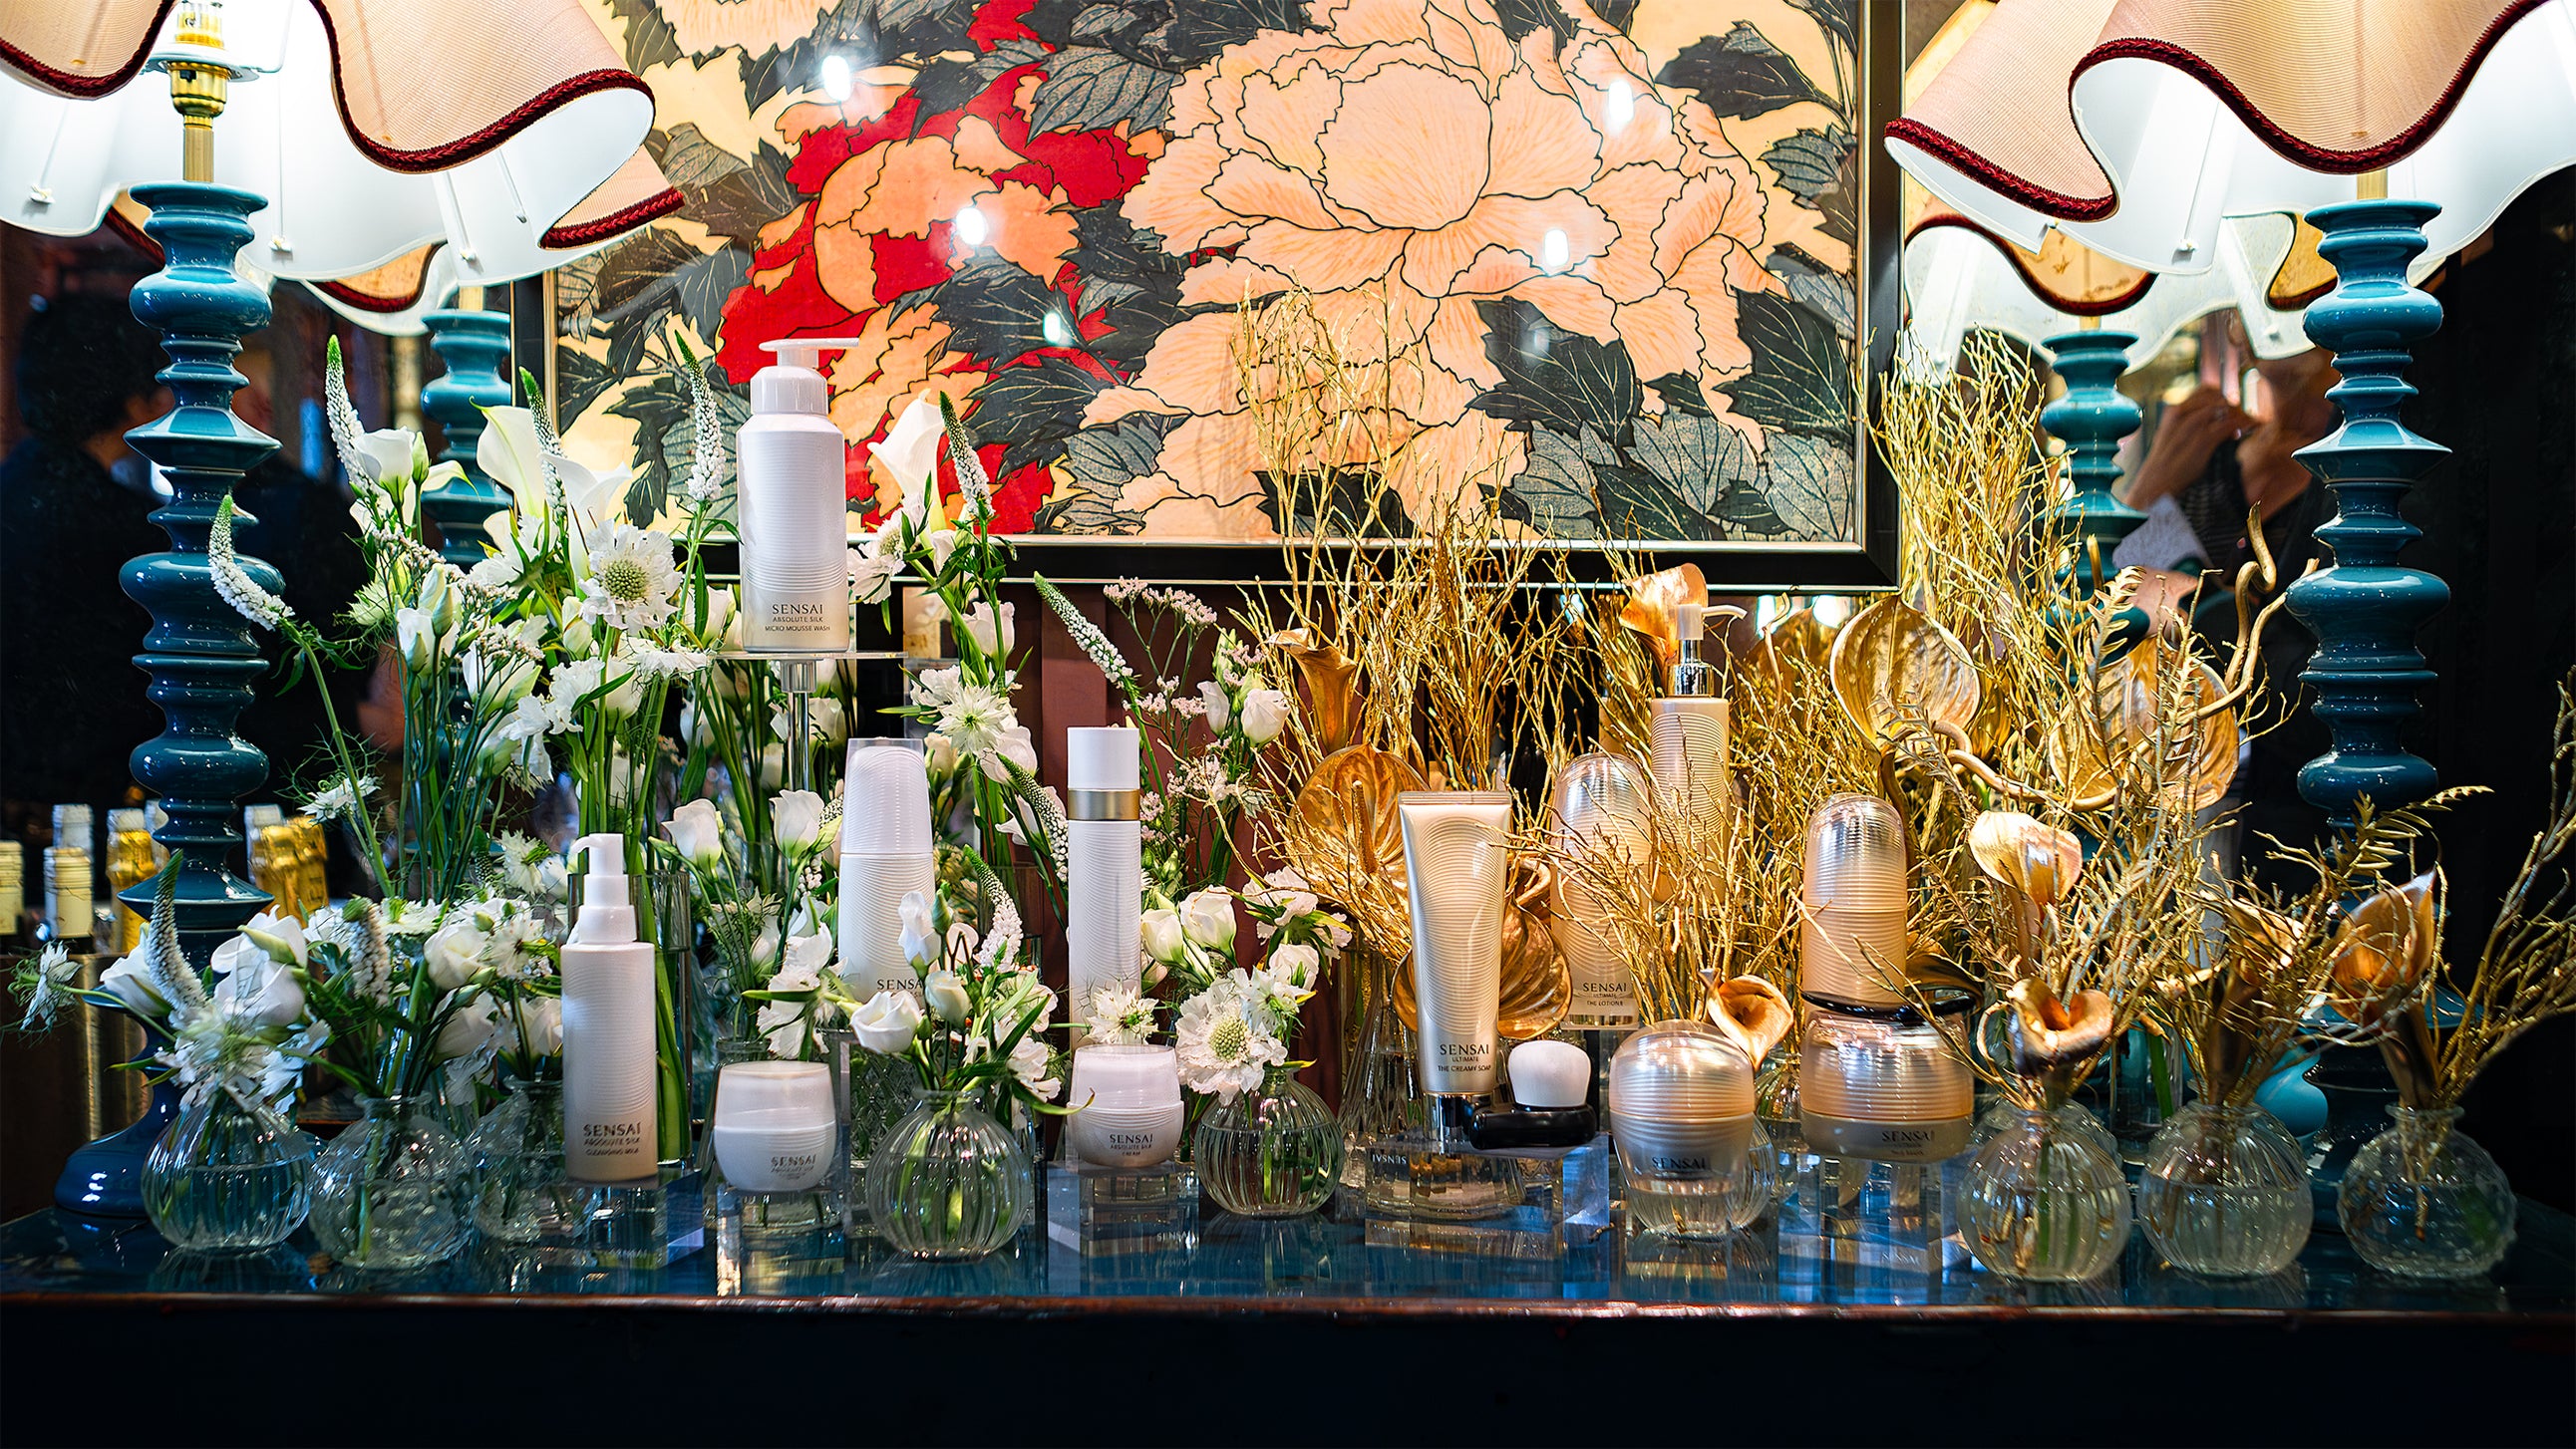 A luxurious display of Sensai skincare products amidst white flower arrangements designed and installed by event florist Amarante London, highlighting the elegance of the Sensai products at their launch at Beaverbrook Town House venue.